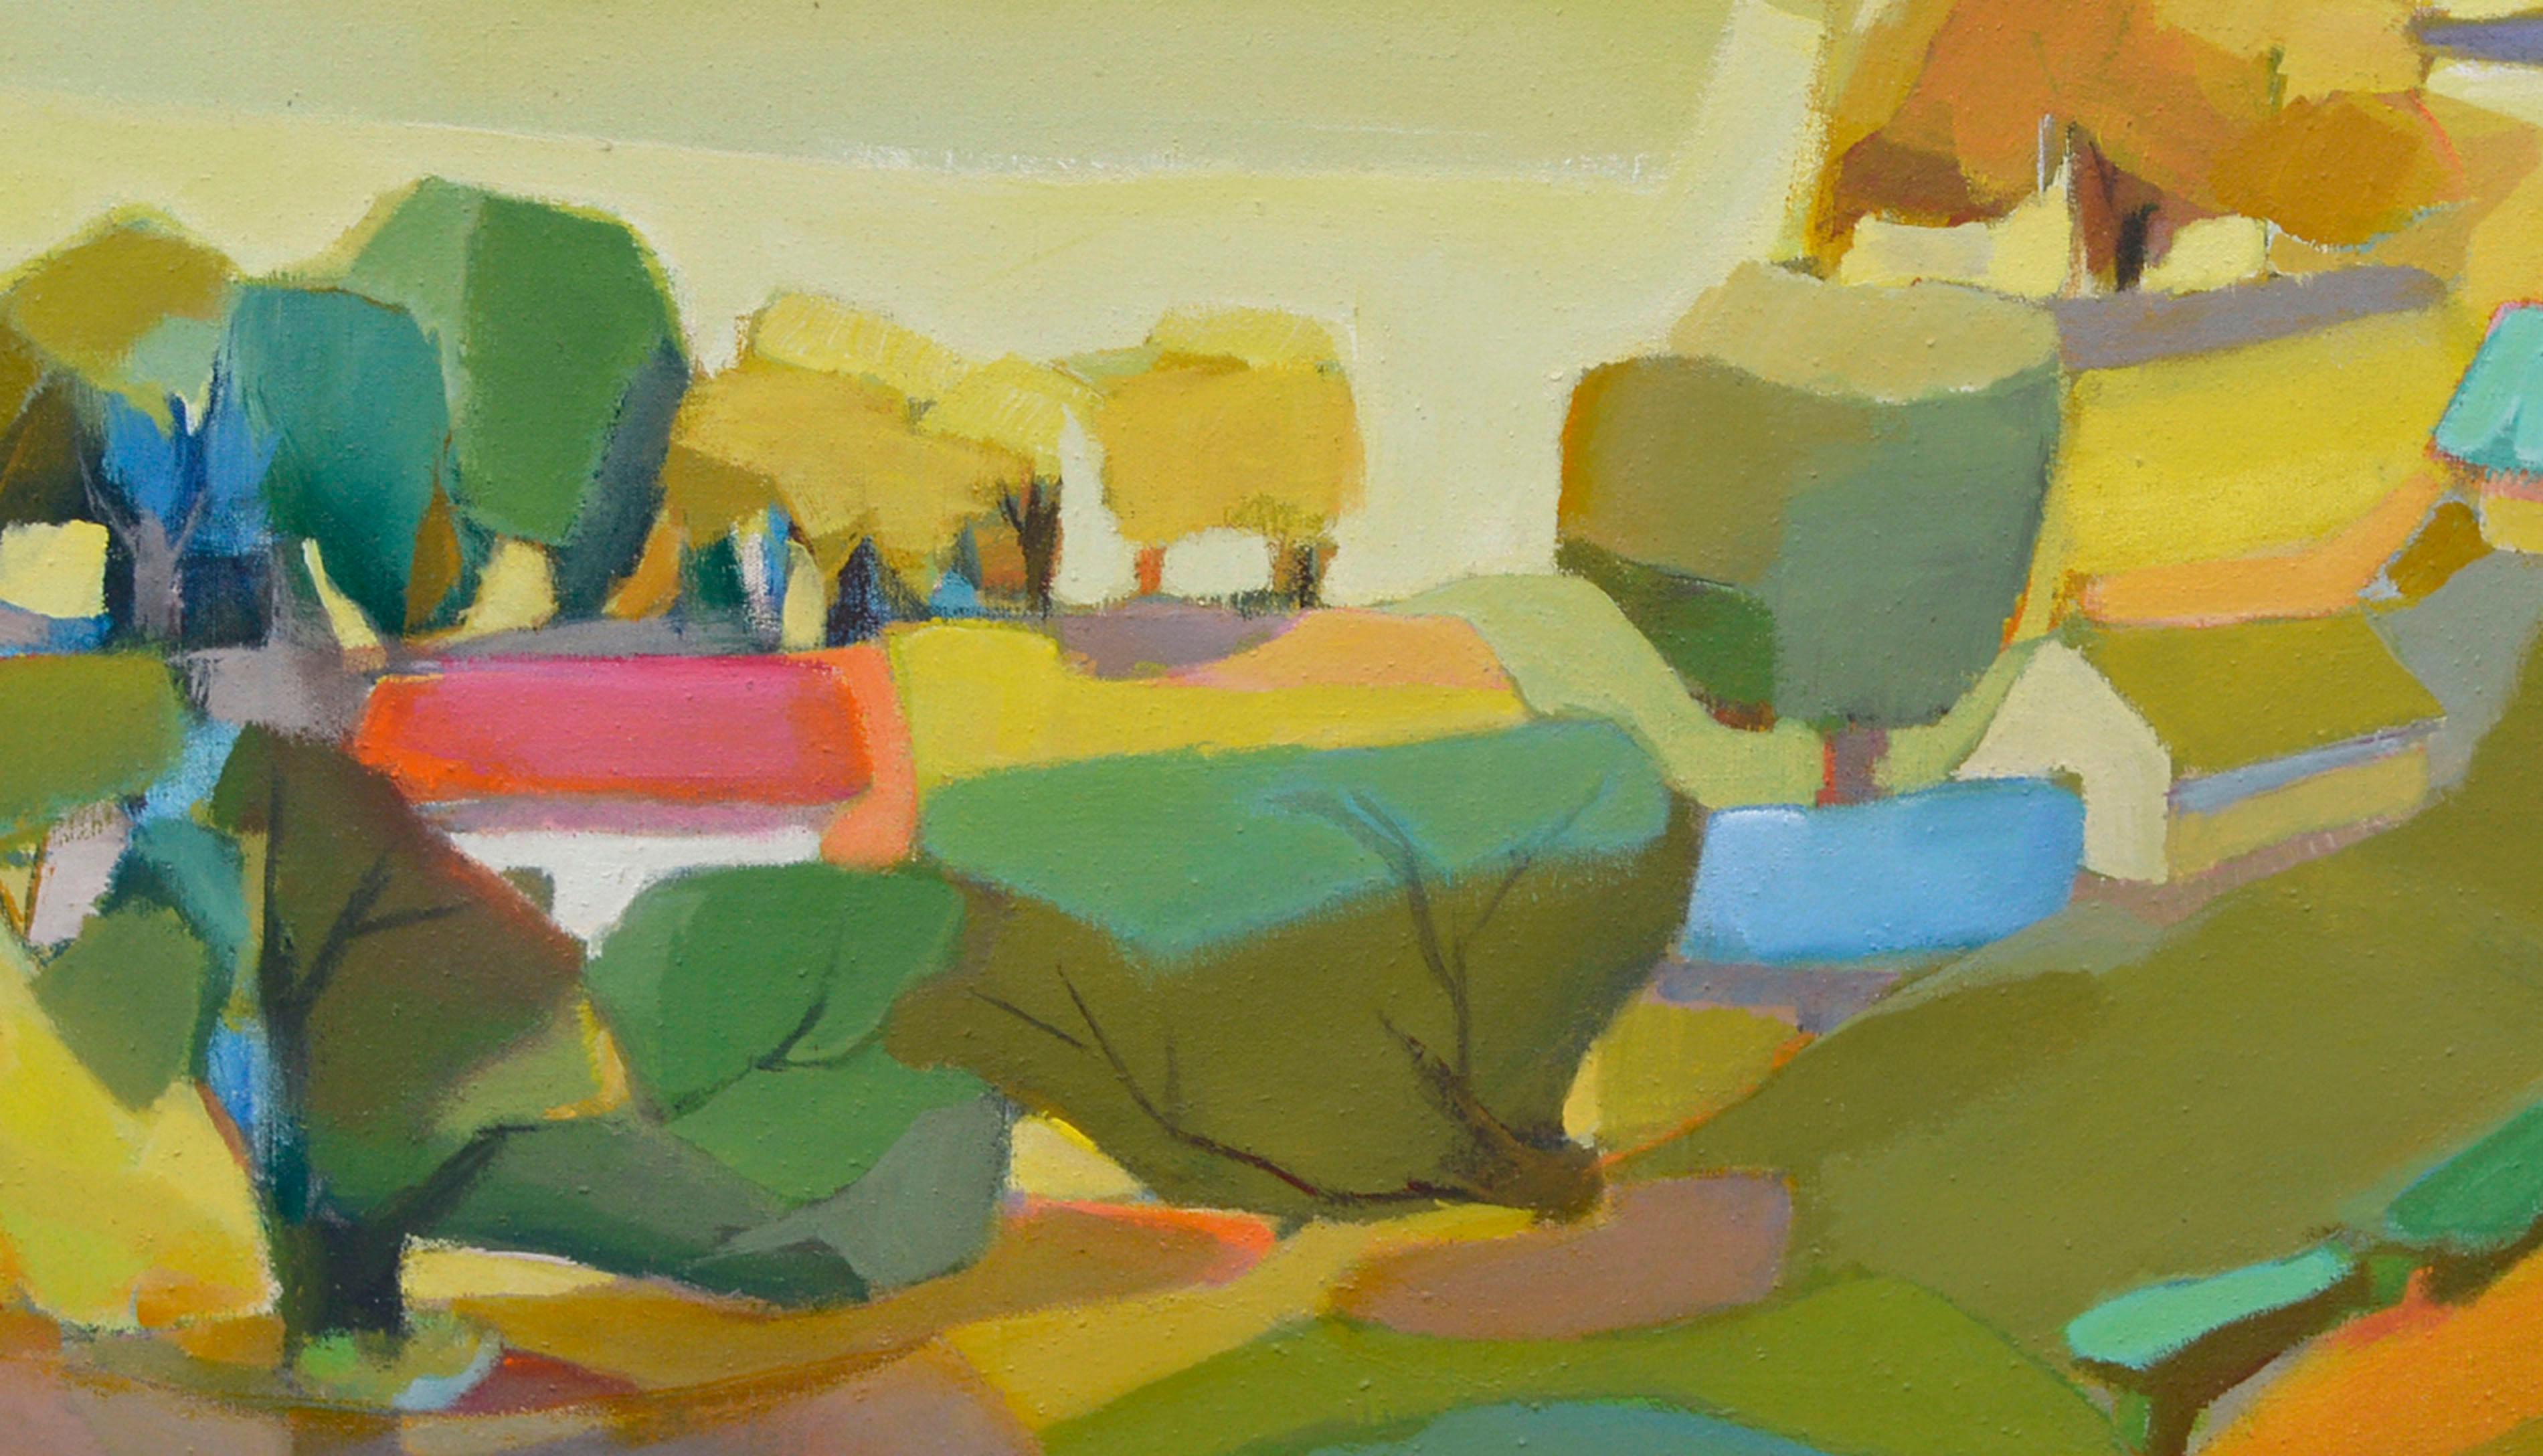 Patchwork Pastoral Abstract Landscape - Color-Field Painting by Marjorie Cathcart